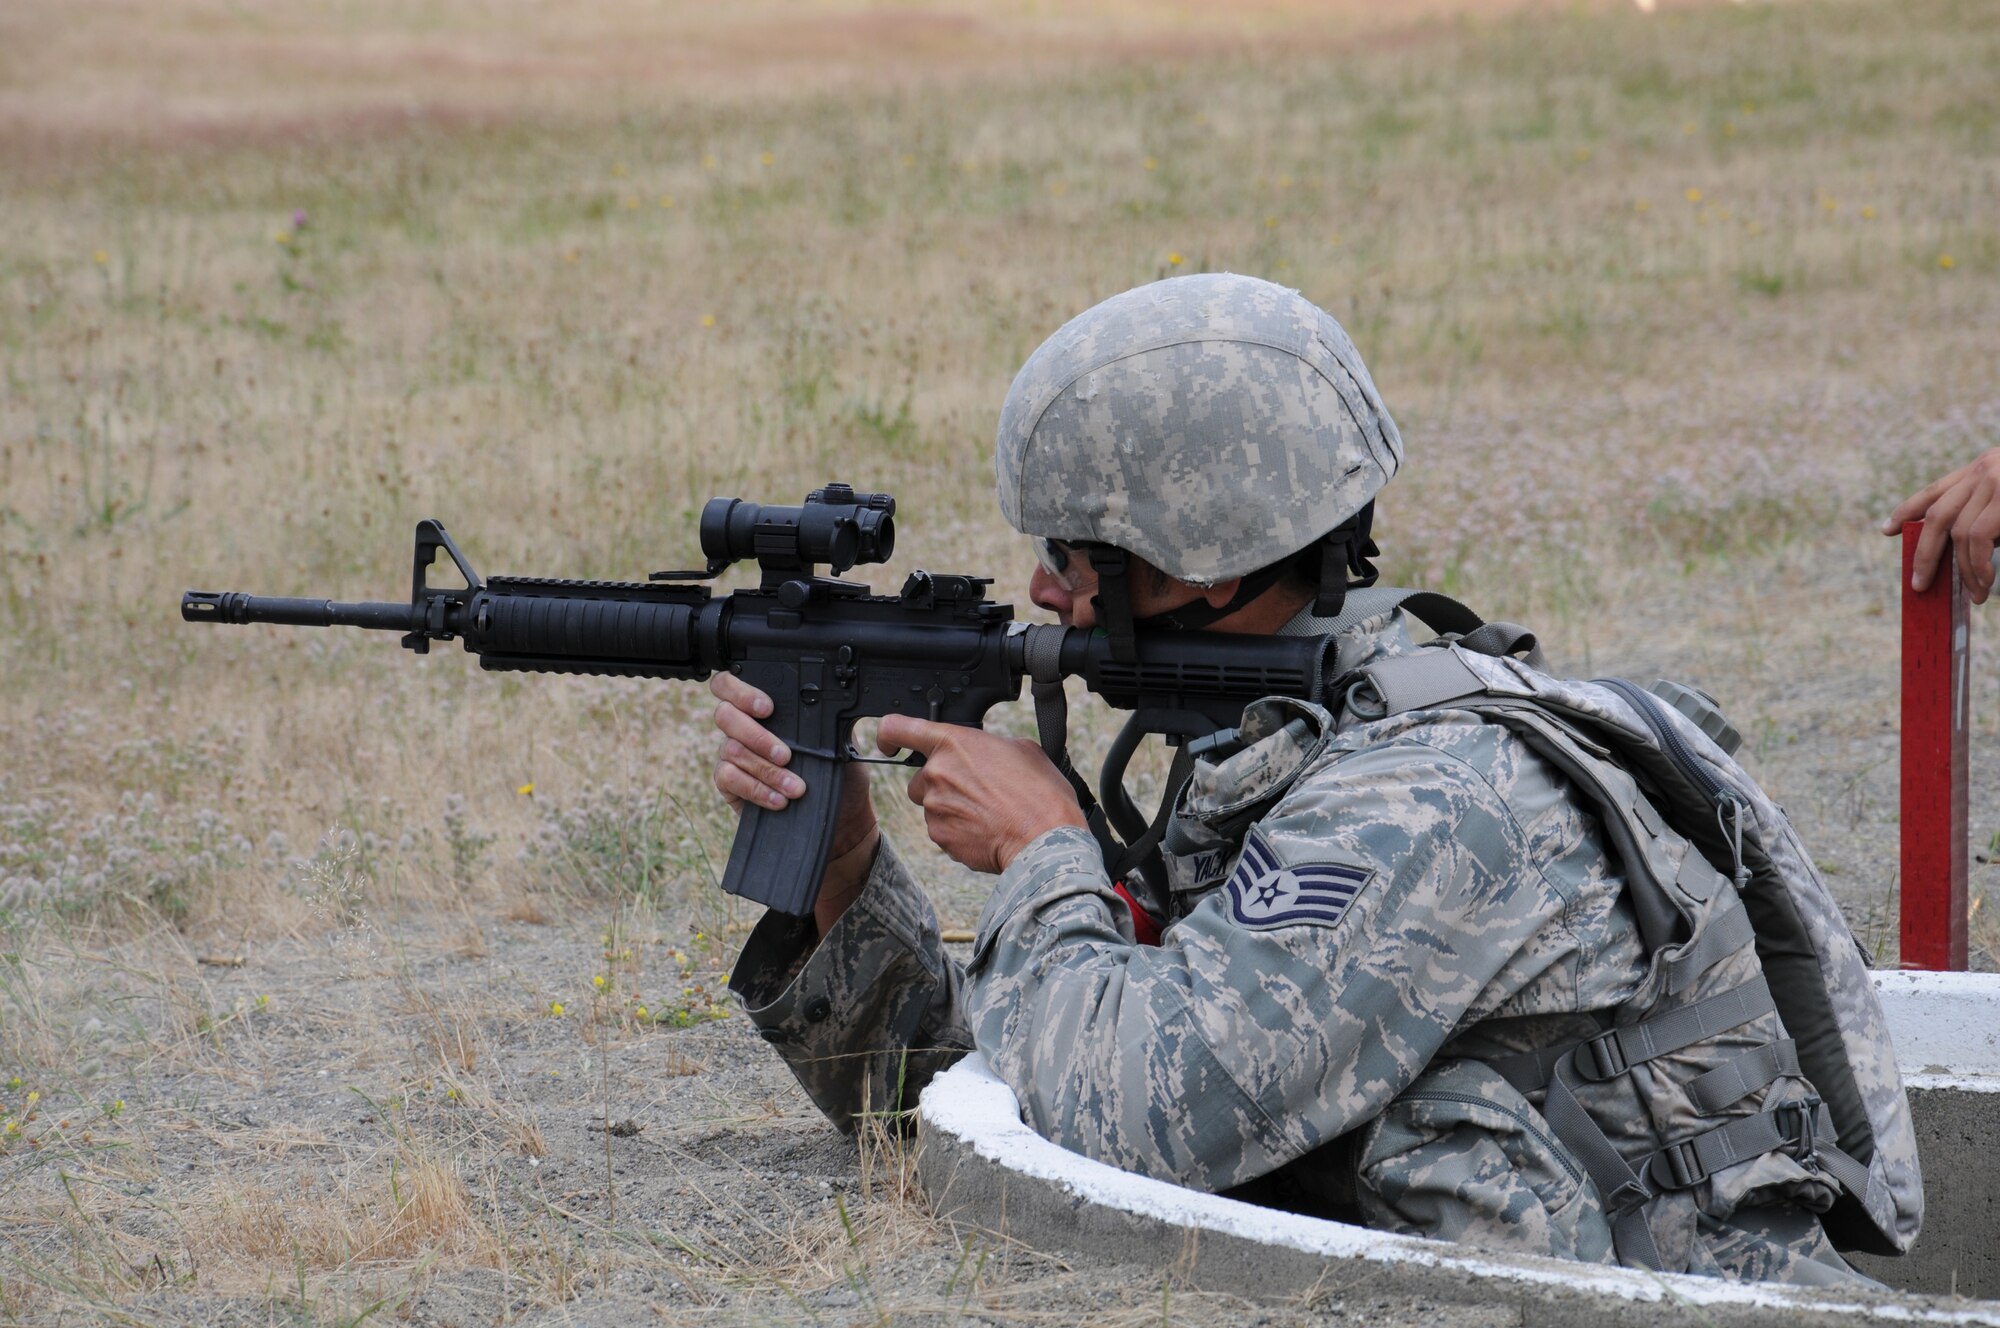 Staff Sgt. David Buchanon, safety manager with the 446th Security Forces Squadron, fires at moving targets with an M-16 during the Combat Weapons competition for Rodeo on Wednesday at the firing range at Joint Base Lewis McChord-Lewis Main. For his civilian job, Buchanan works in reports and analysis at the Doctorate of Emergency Services on Lewis Main. (U.S. Air Force photo by 2nd Lt. Denise Hauser)